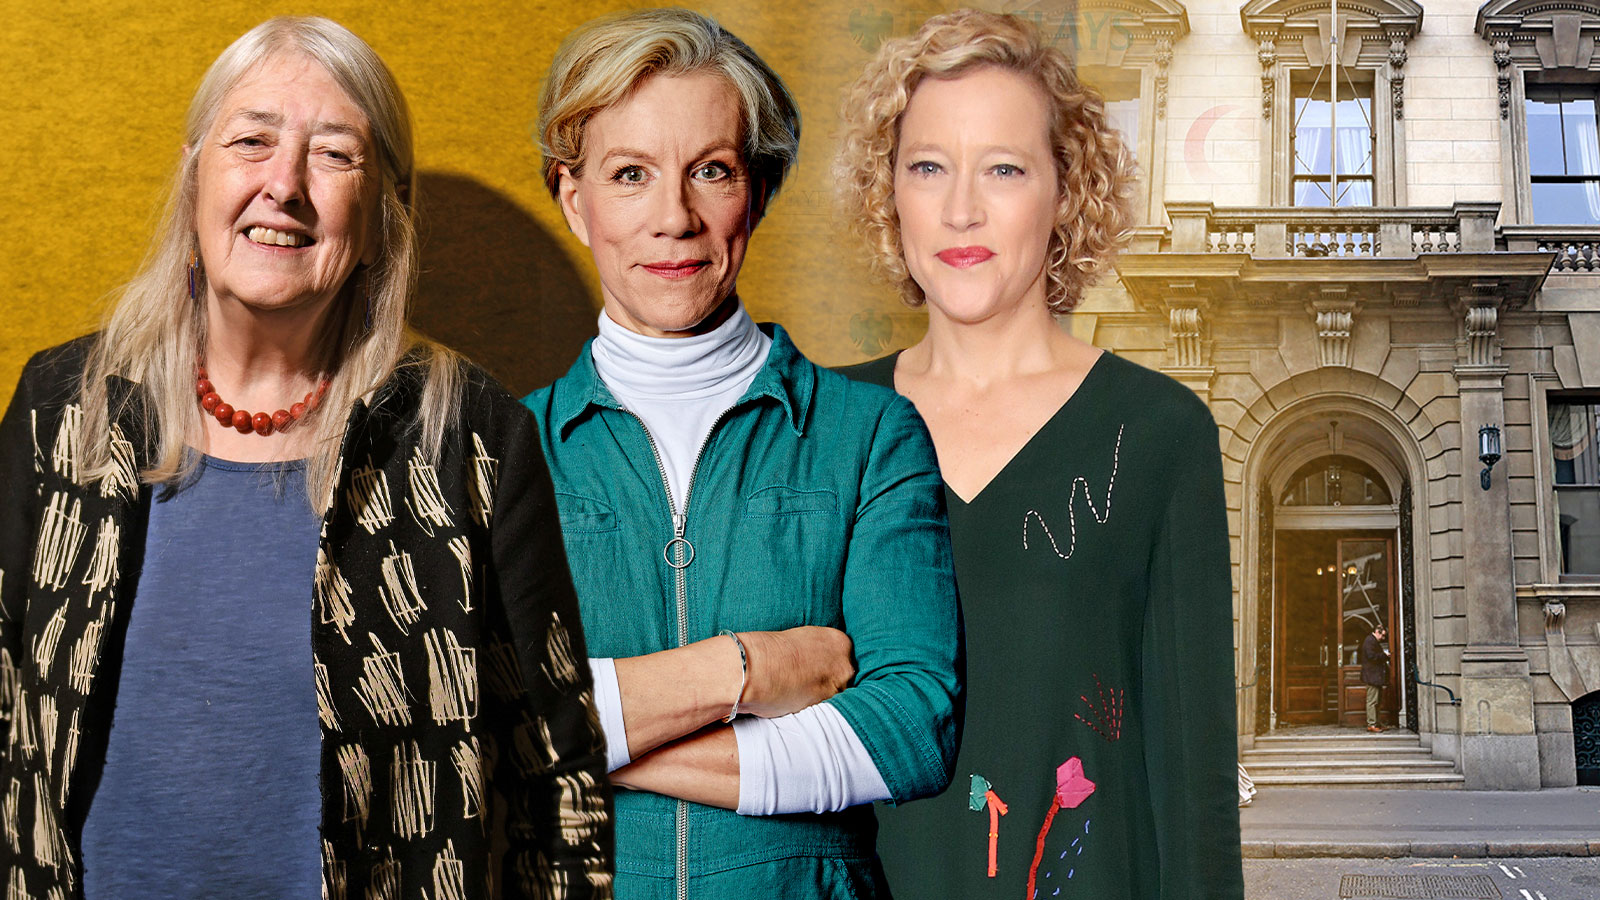 The academic and broadcaster Mary Beard, the actress Juliet Stevenson and the journalist Cathy Newman are on the list